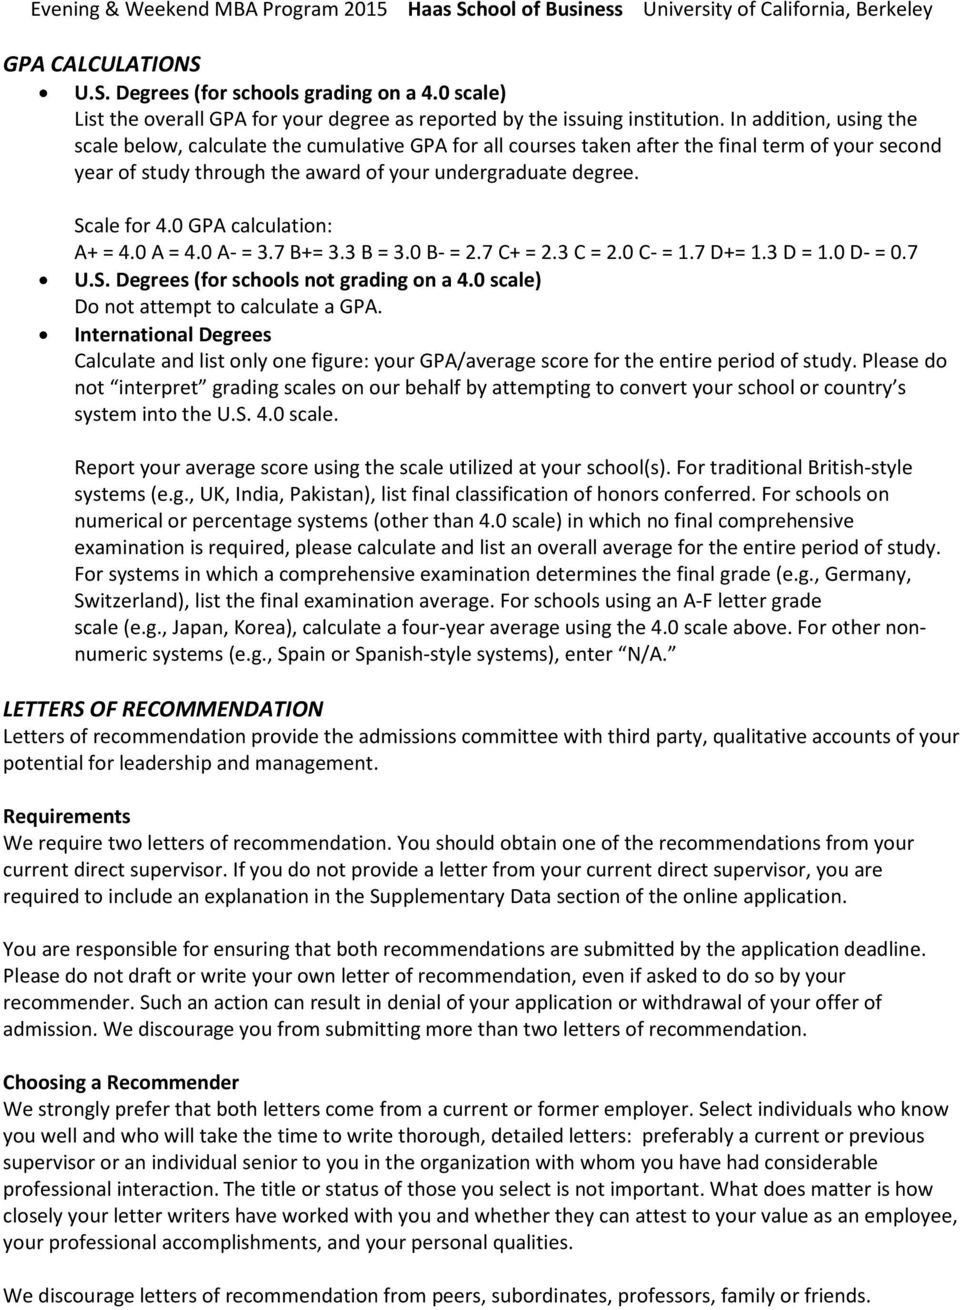 Fall 2015 Application Instructions Pdf Free Download throughout size 960 X 1310